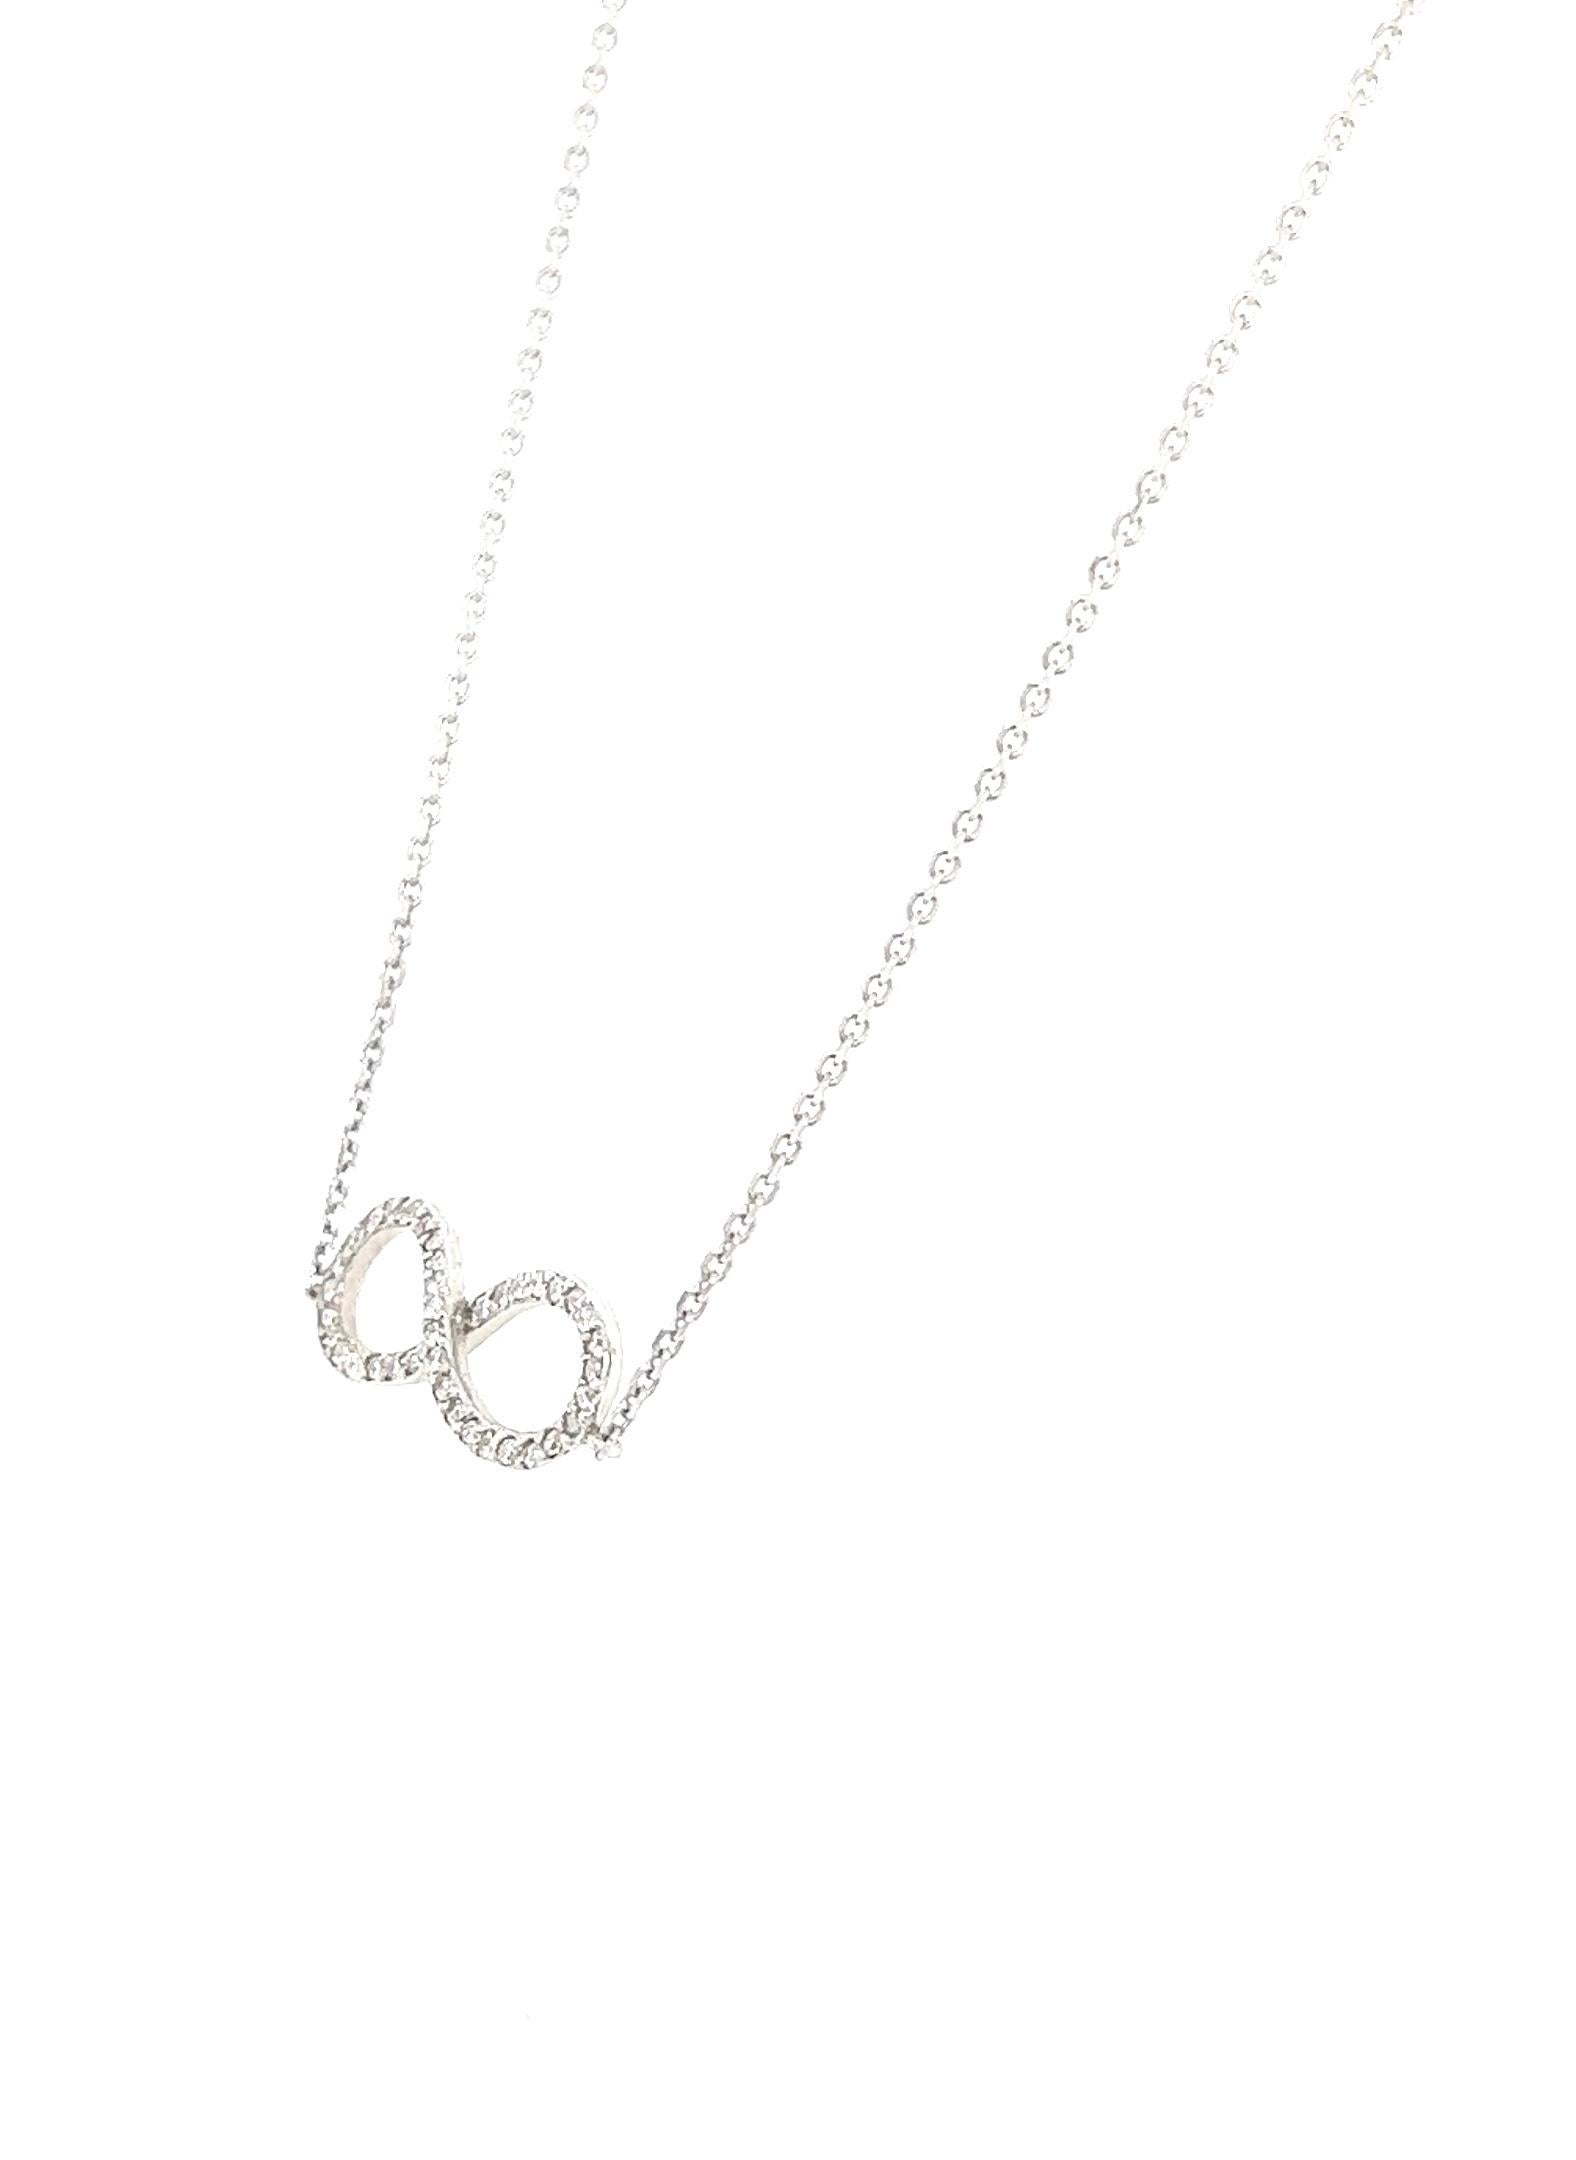 This necklace has Natural Round Cut Diamonds that weigh 0.21 carats. The clarity and color of the diamonds are VS-H.

The necklace is 16 inches in length, weighs approximately 2.5 grams and is set in 14 Karat White Gold. 

This necklace is perfect